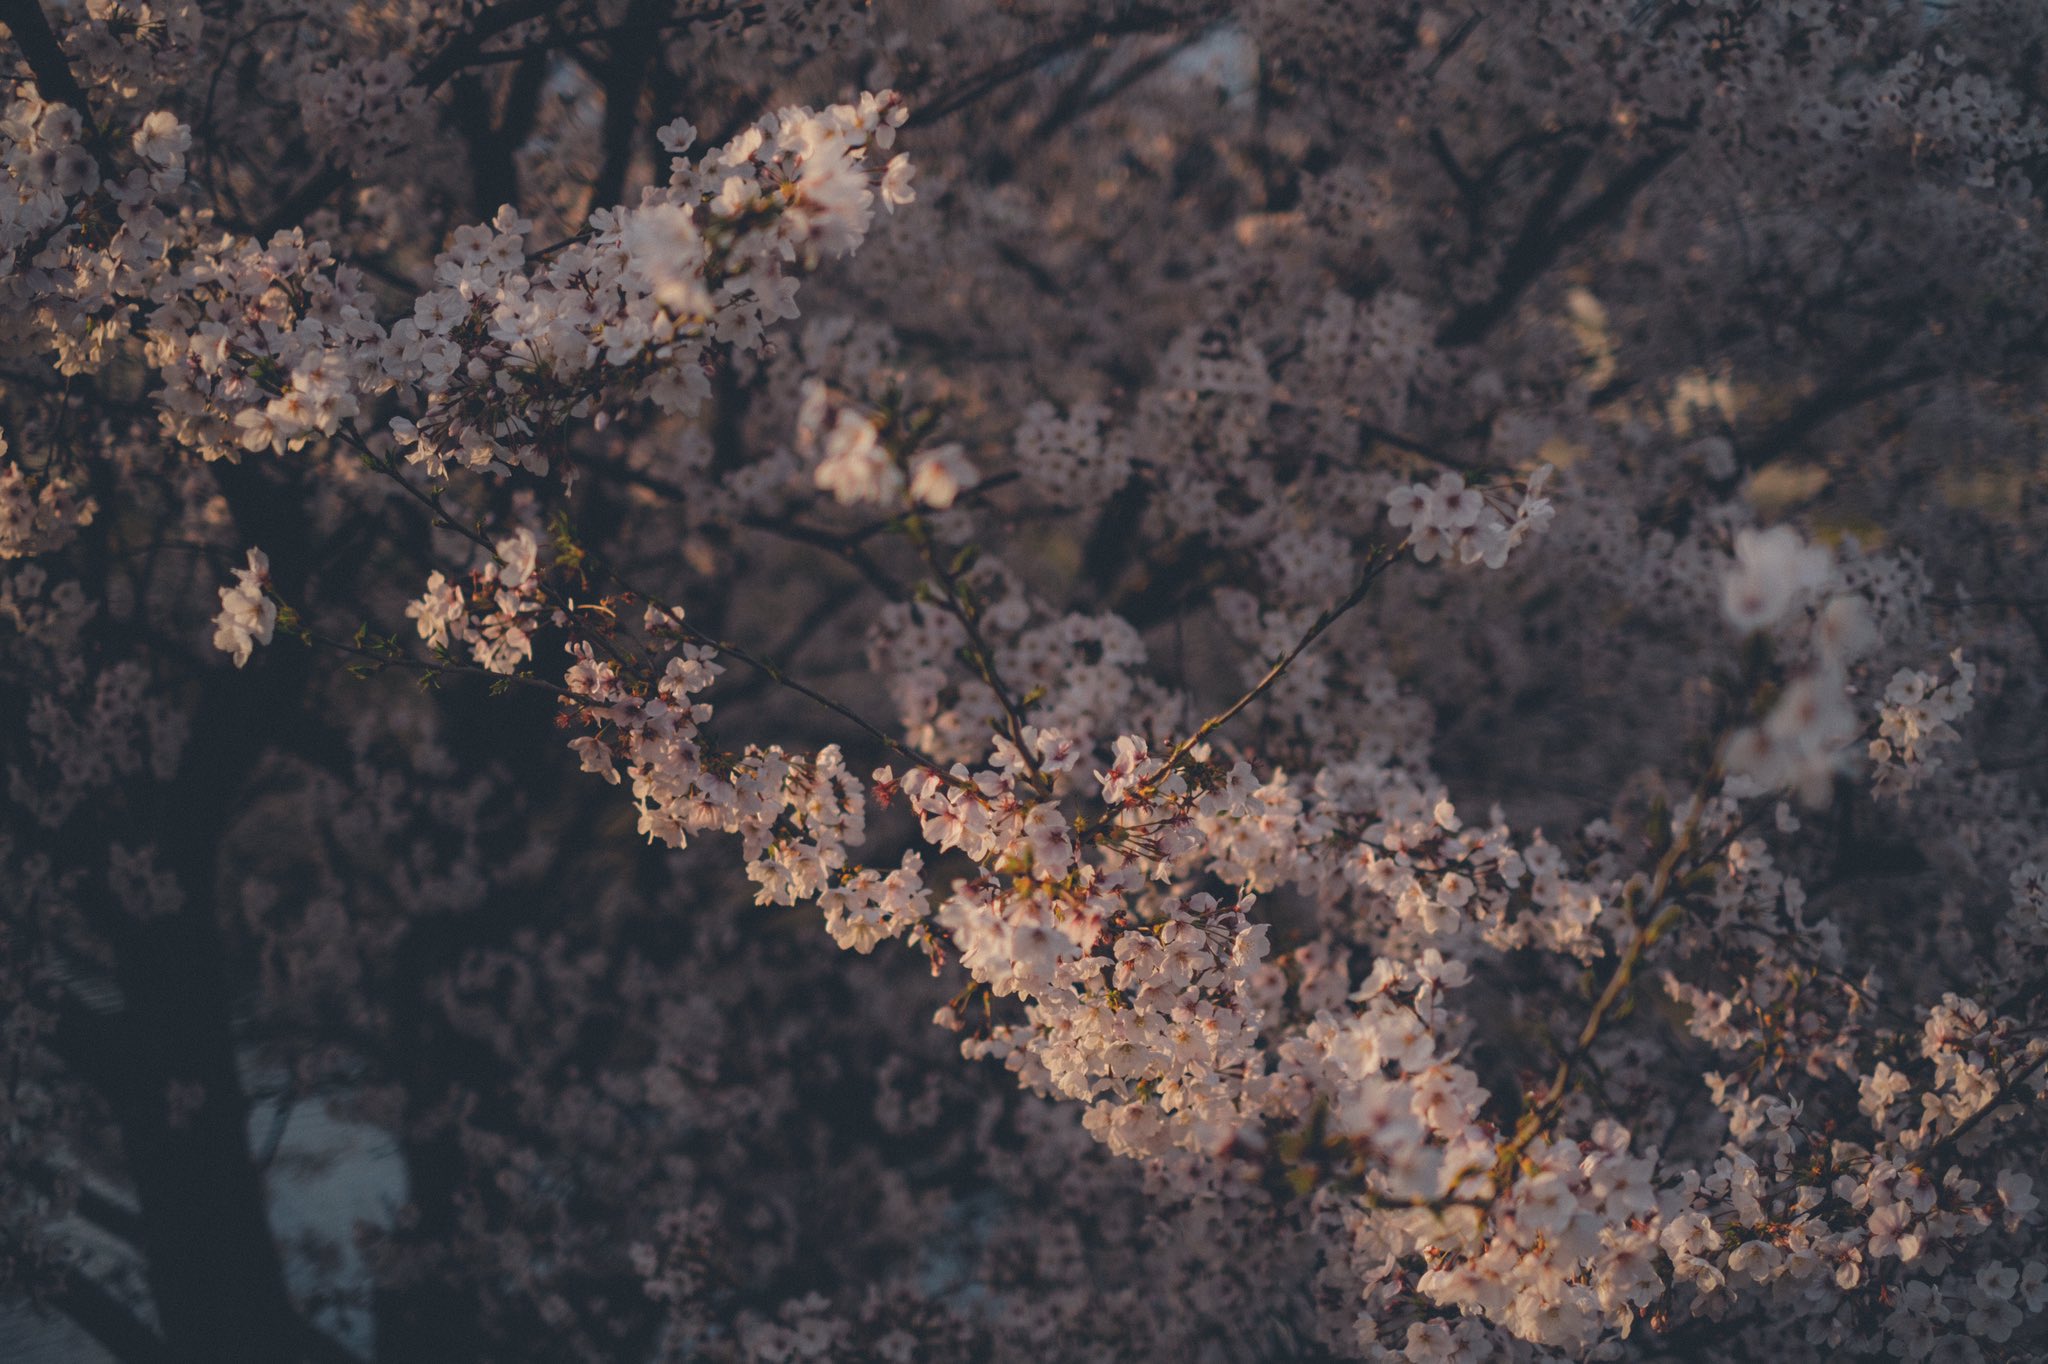 General 2048x1364 cherry blossom nature trees flowers